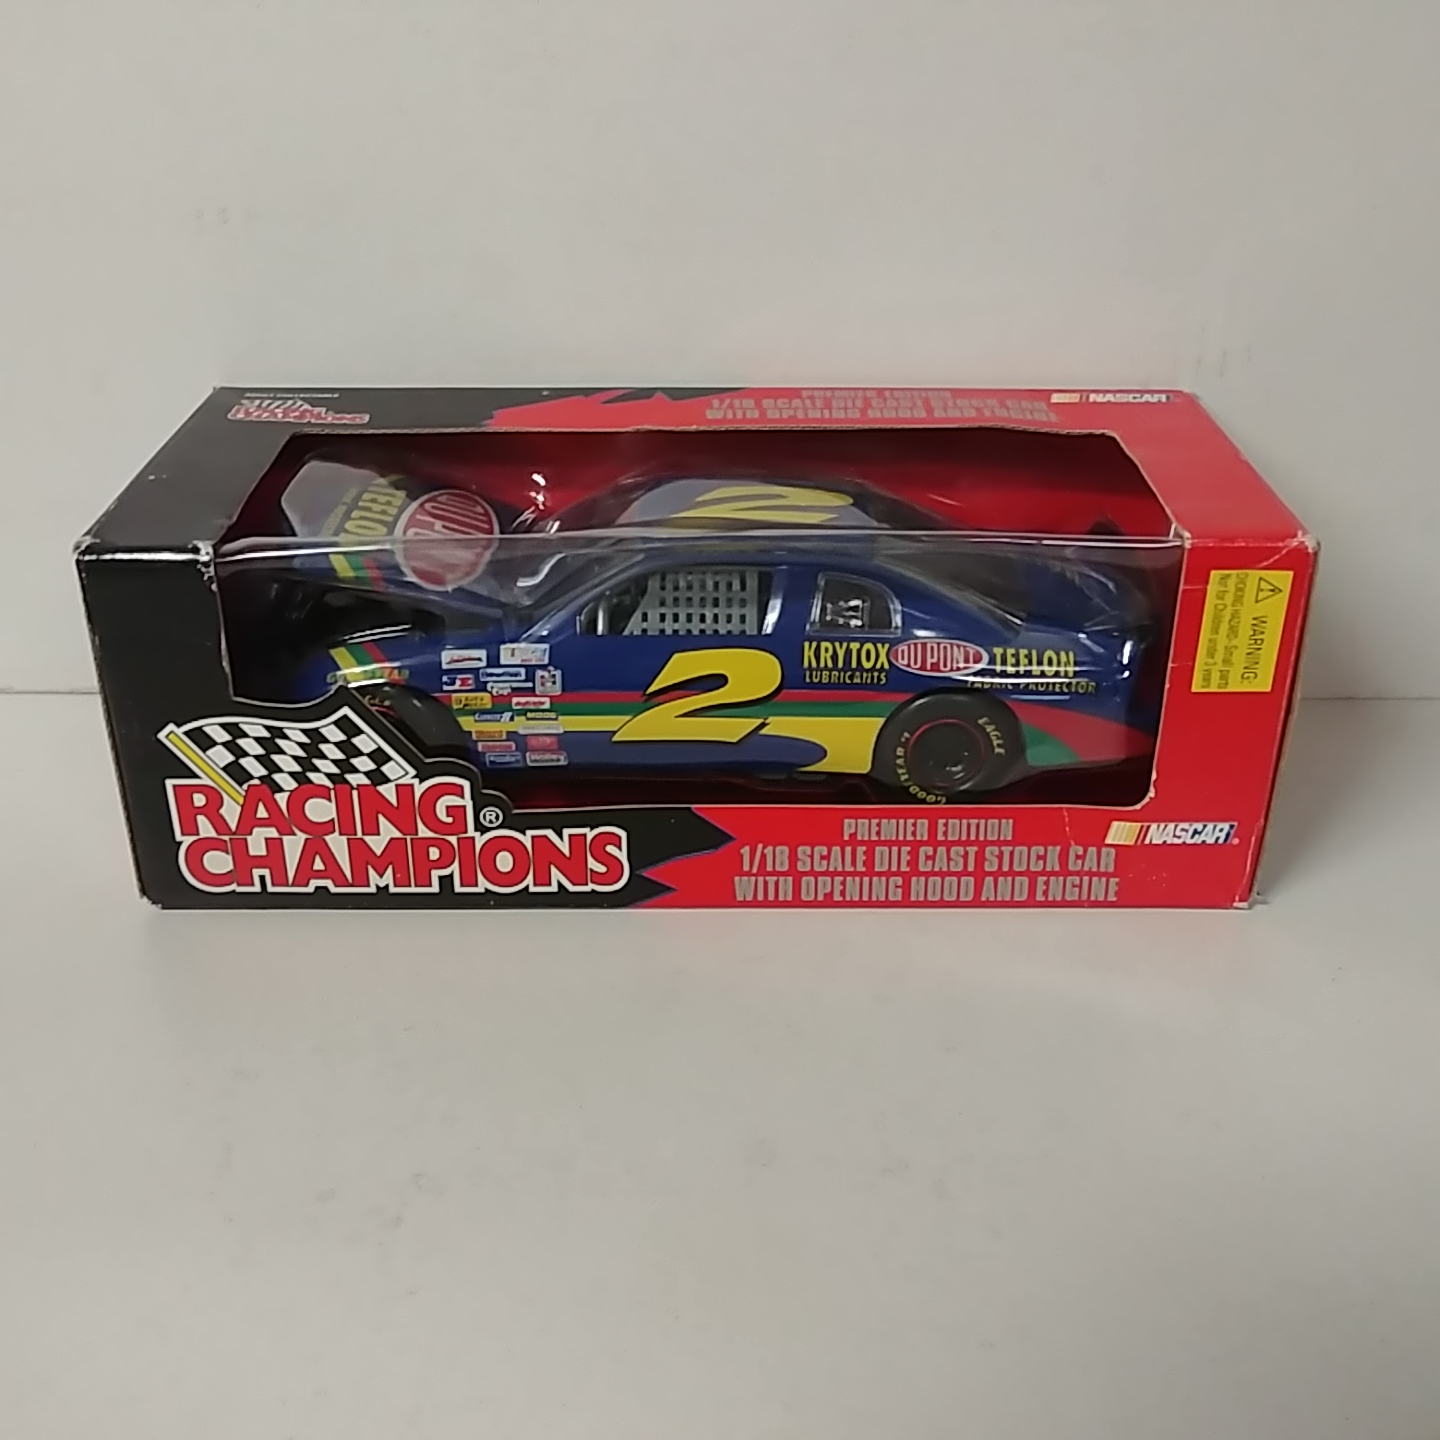 1996 Ricky Craven 1/18th Dupont "Busch Series" car